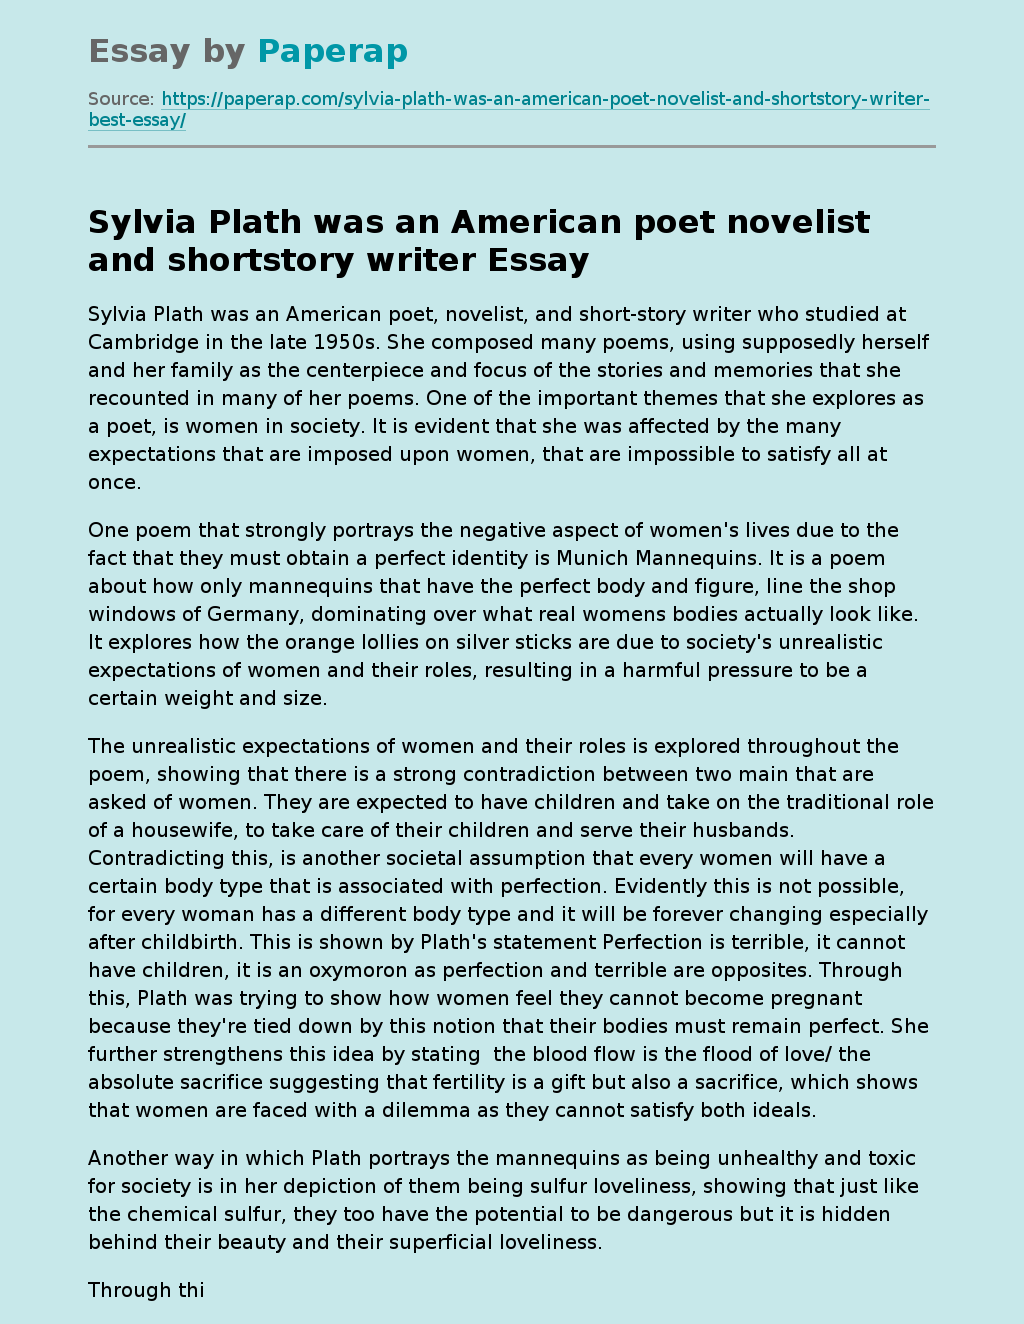 Sylvia Plath was an American Poet Novelist and Shortstory Writer